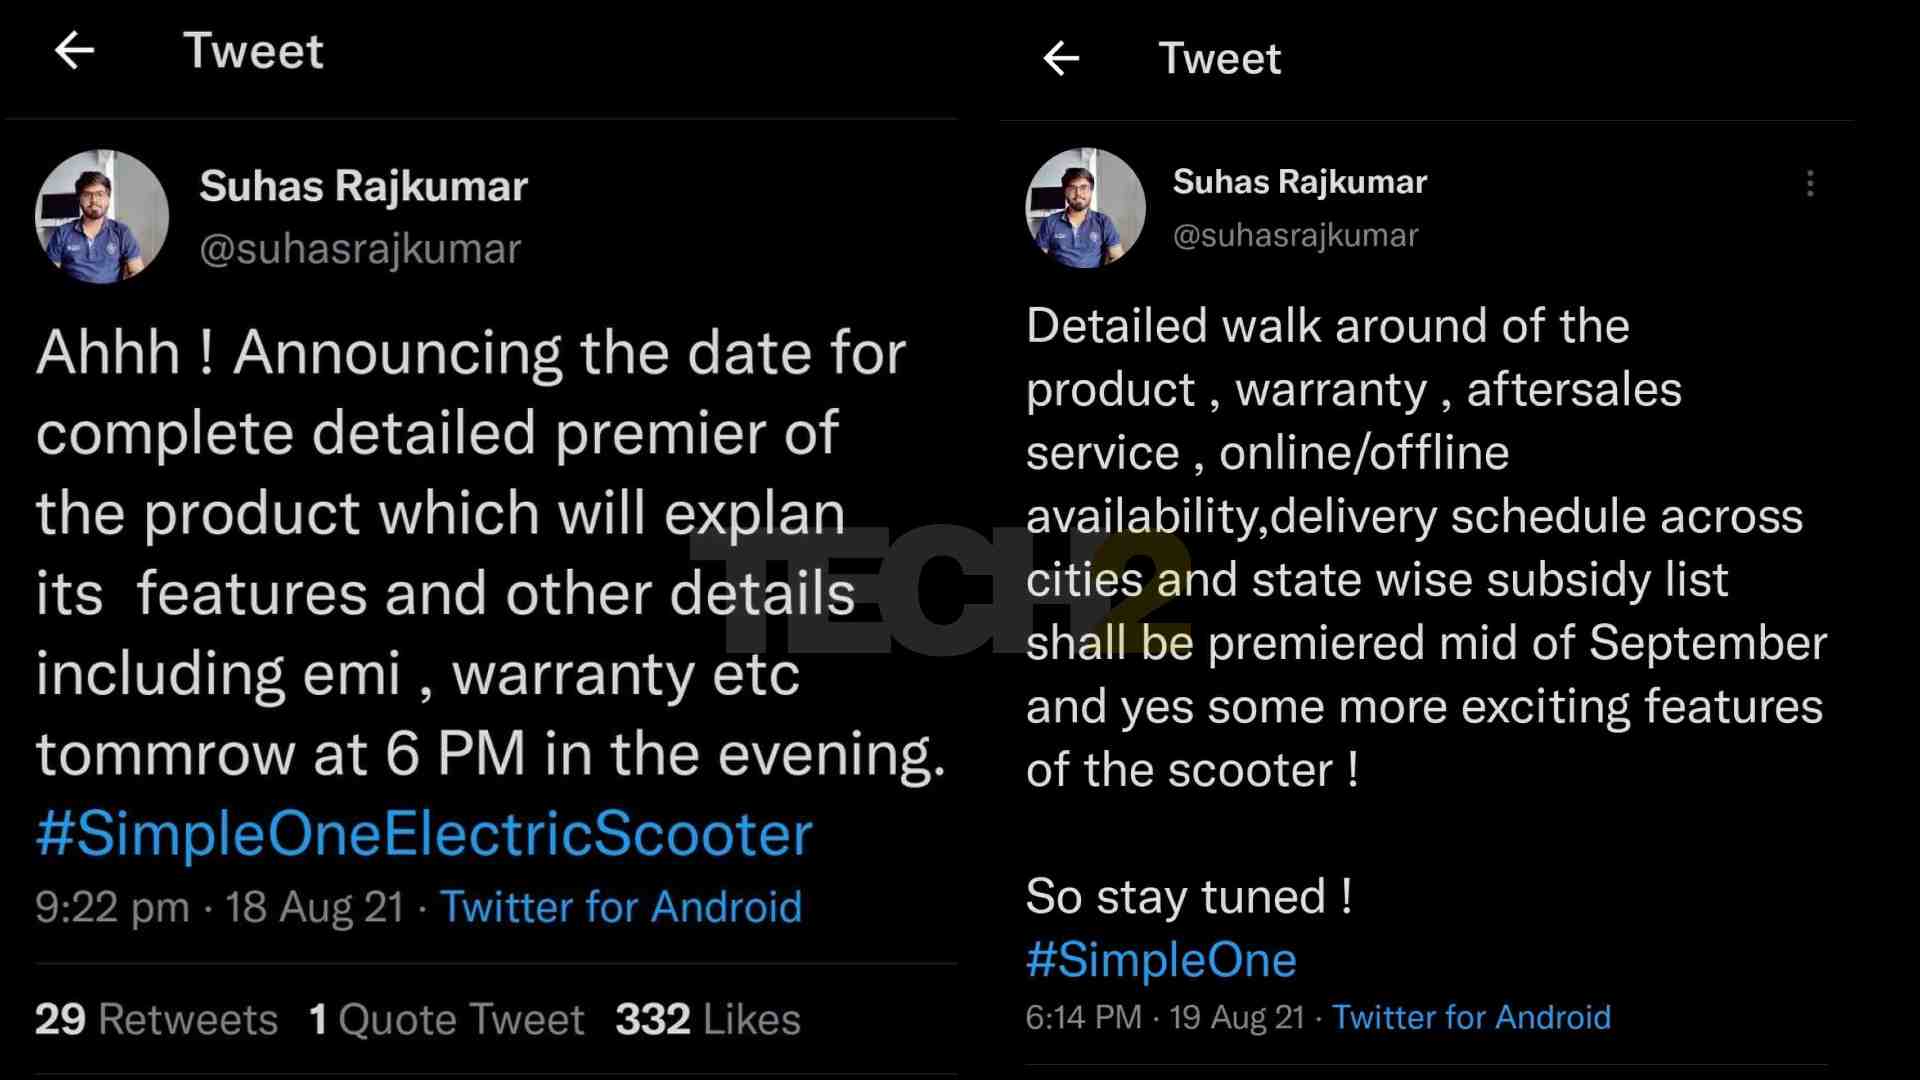 Rajkumar has removed tweets related to the announcement of Simple One details, creating uncertainty in the minds of potential buyers.